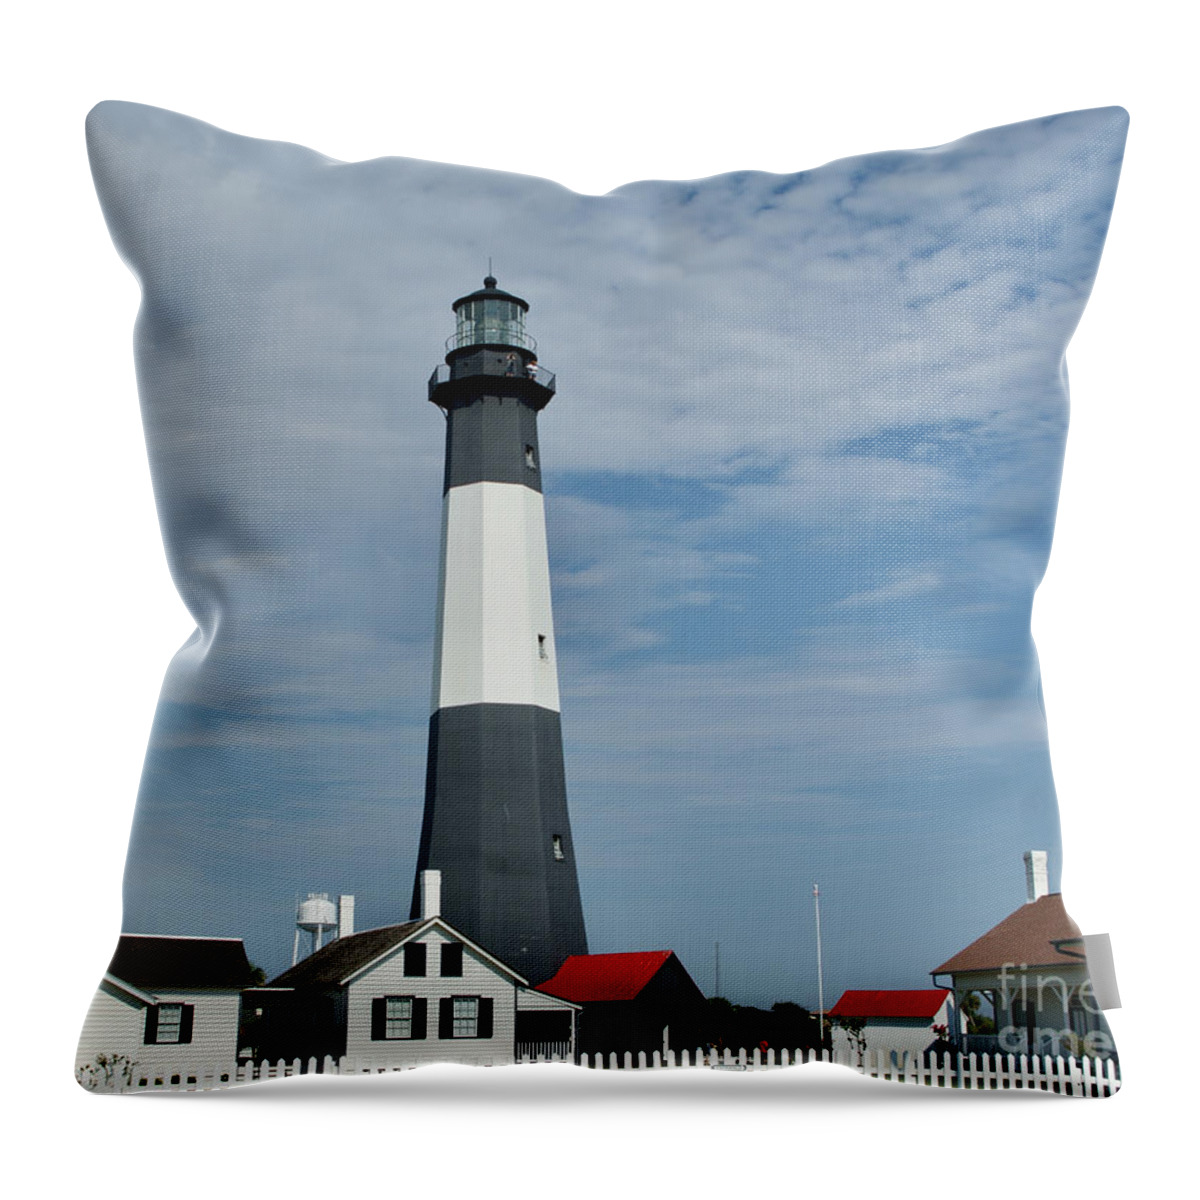  Throw Pillow featuring the photograph Tybee by Annamaria Frost